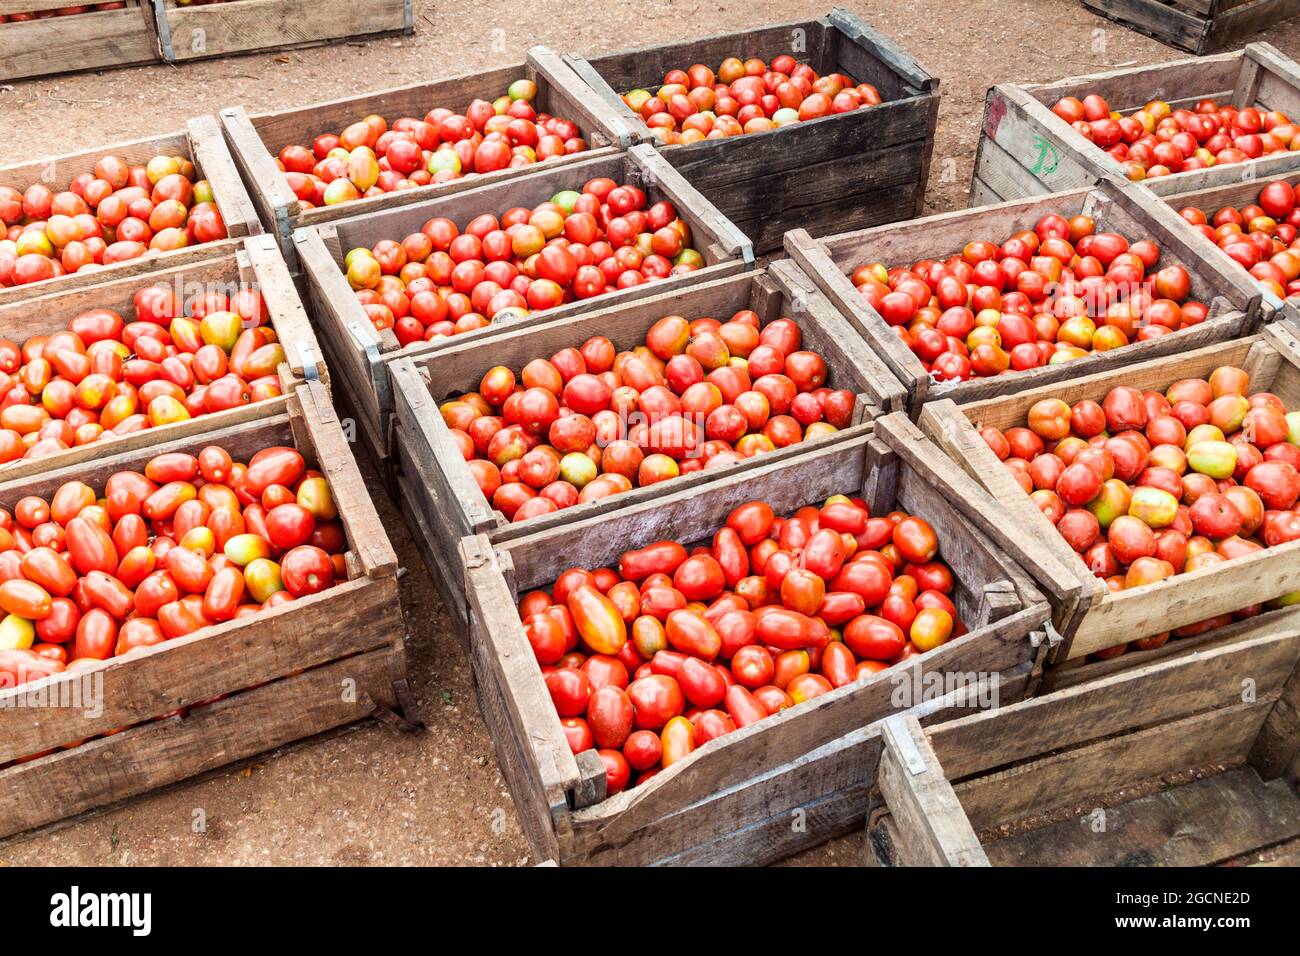 Crates of tomatoes at the Mercado Agropeculario (Agriculture Market) Hatibonico in Camaguey, Cuba Stock Photo